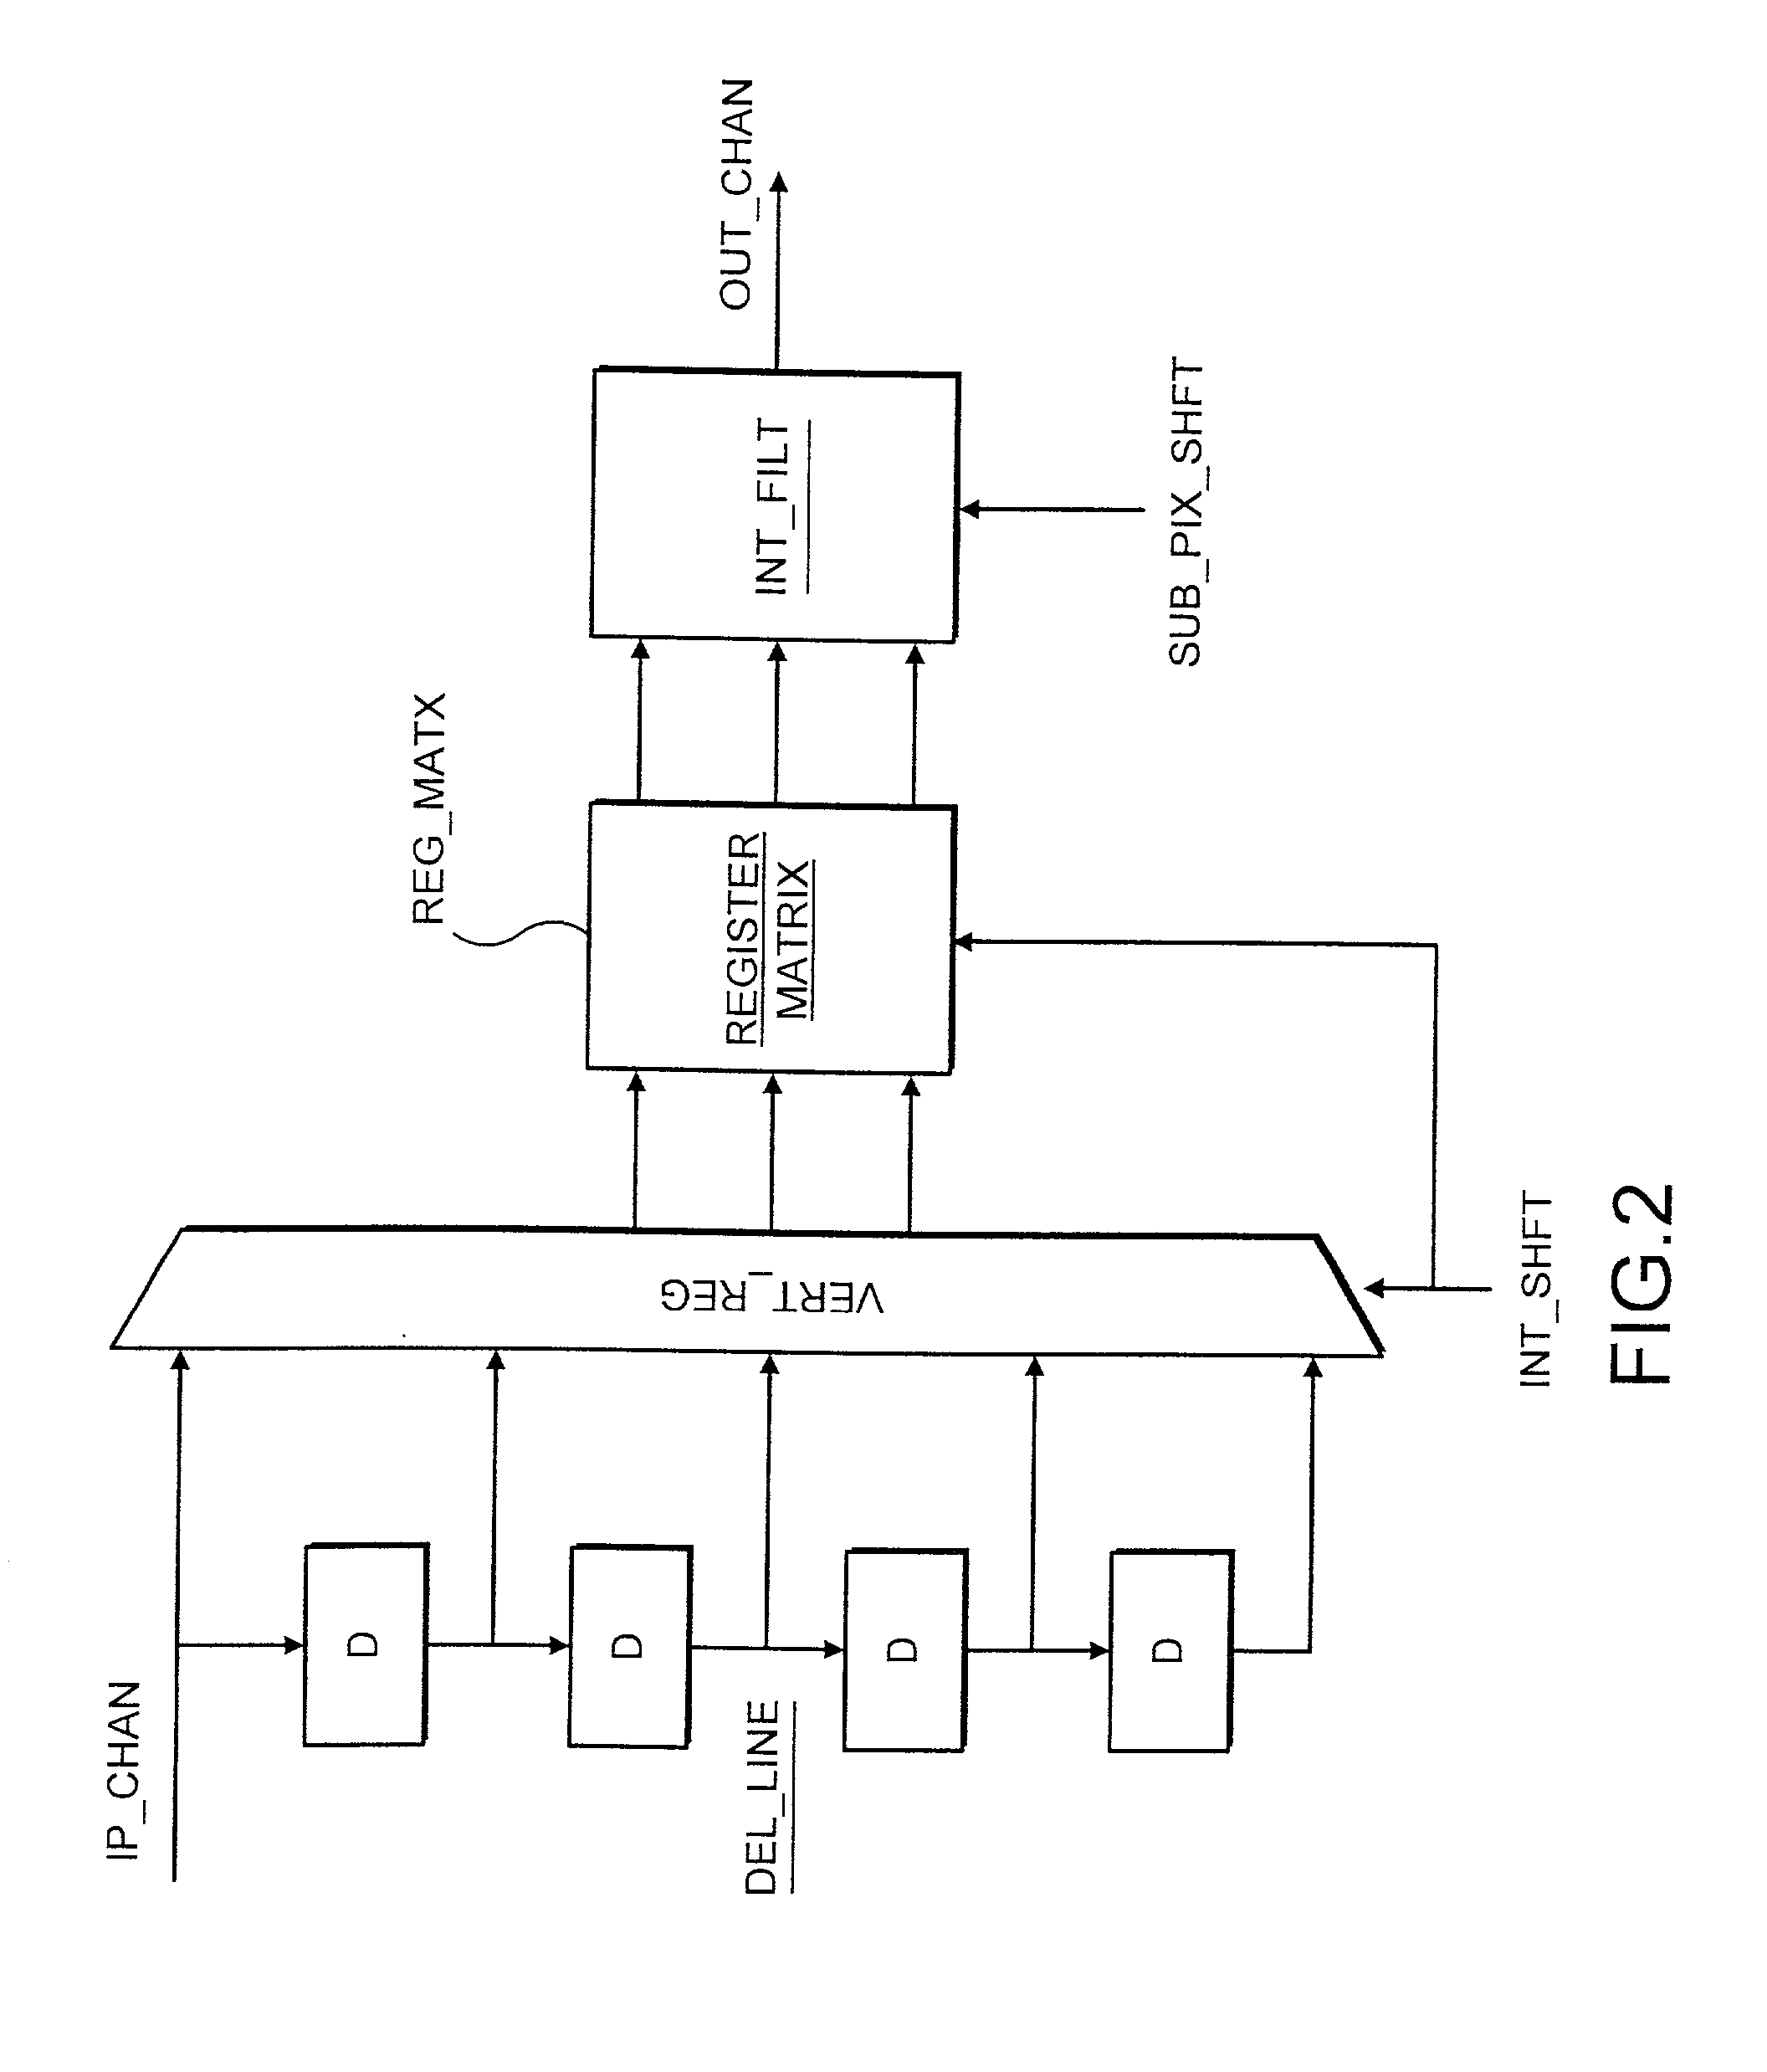 Image processor and method of processing images